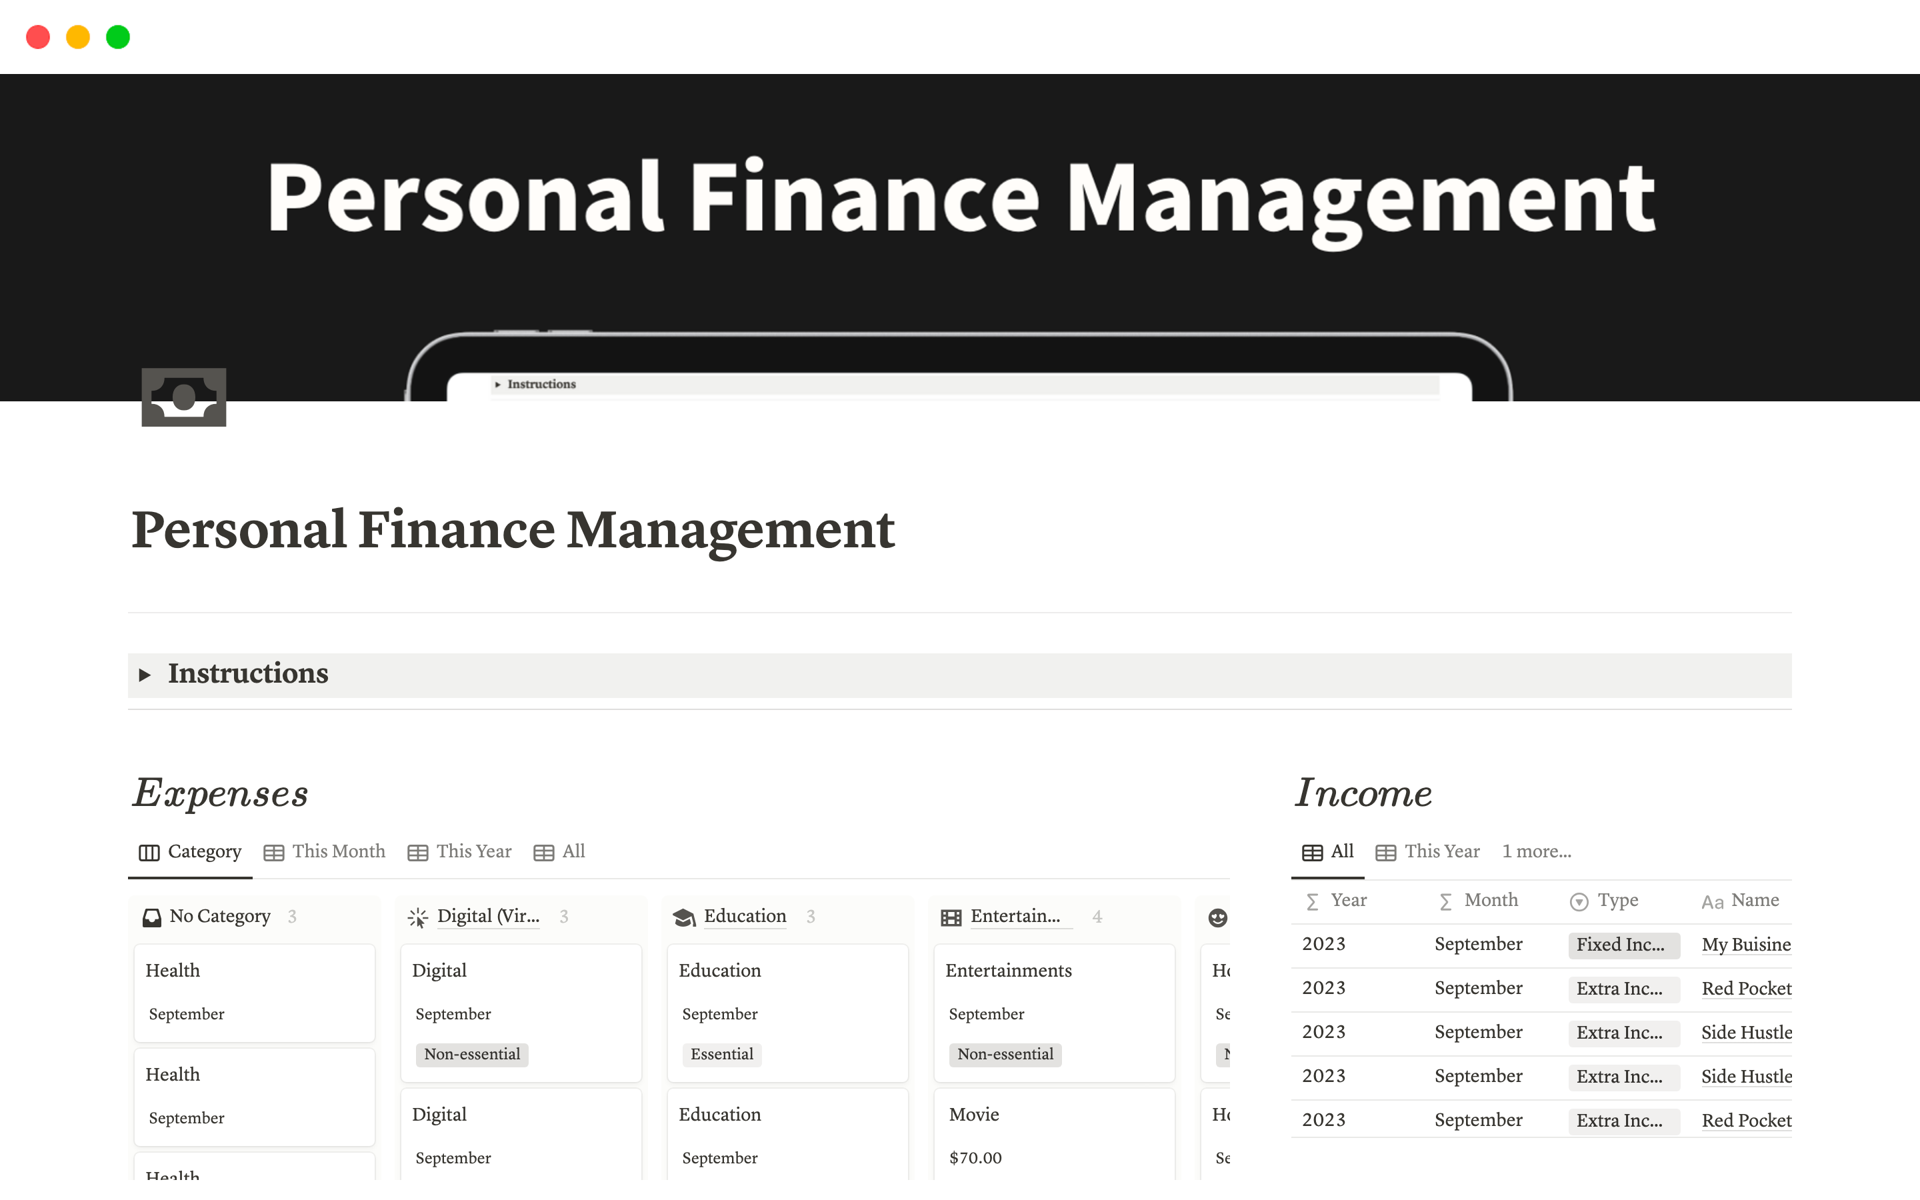 A personal finance management system that integrates budgeting, income, expenses, and asset statistics, which can clearly captures all your financial details, steering you away from consumerism and turning you into a savvy saver!